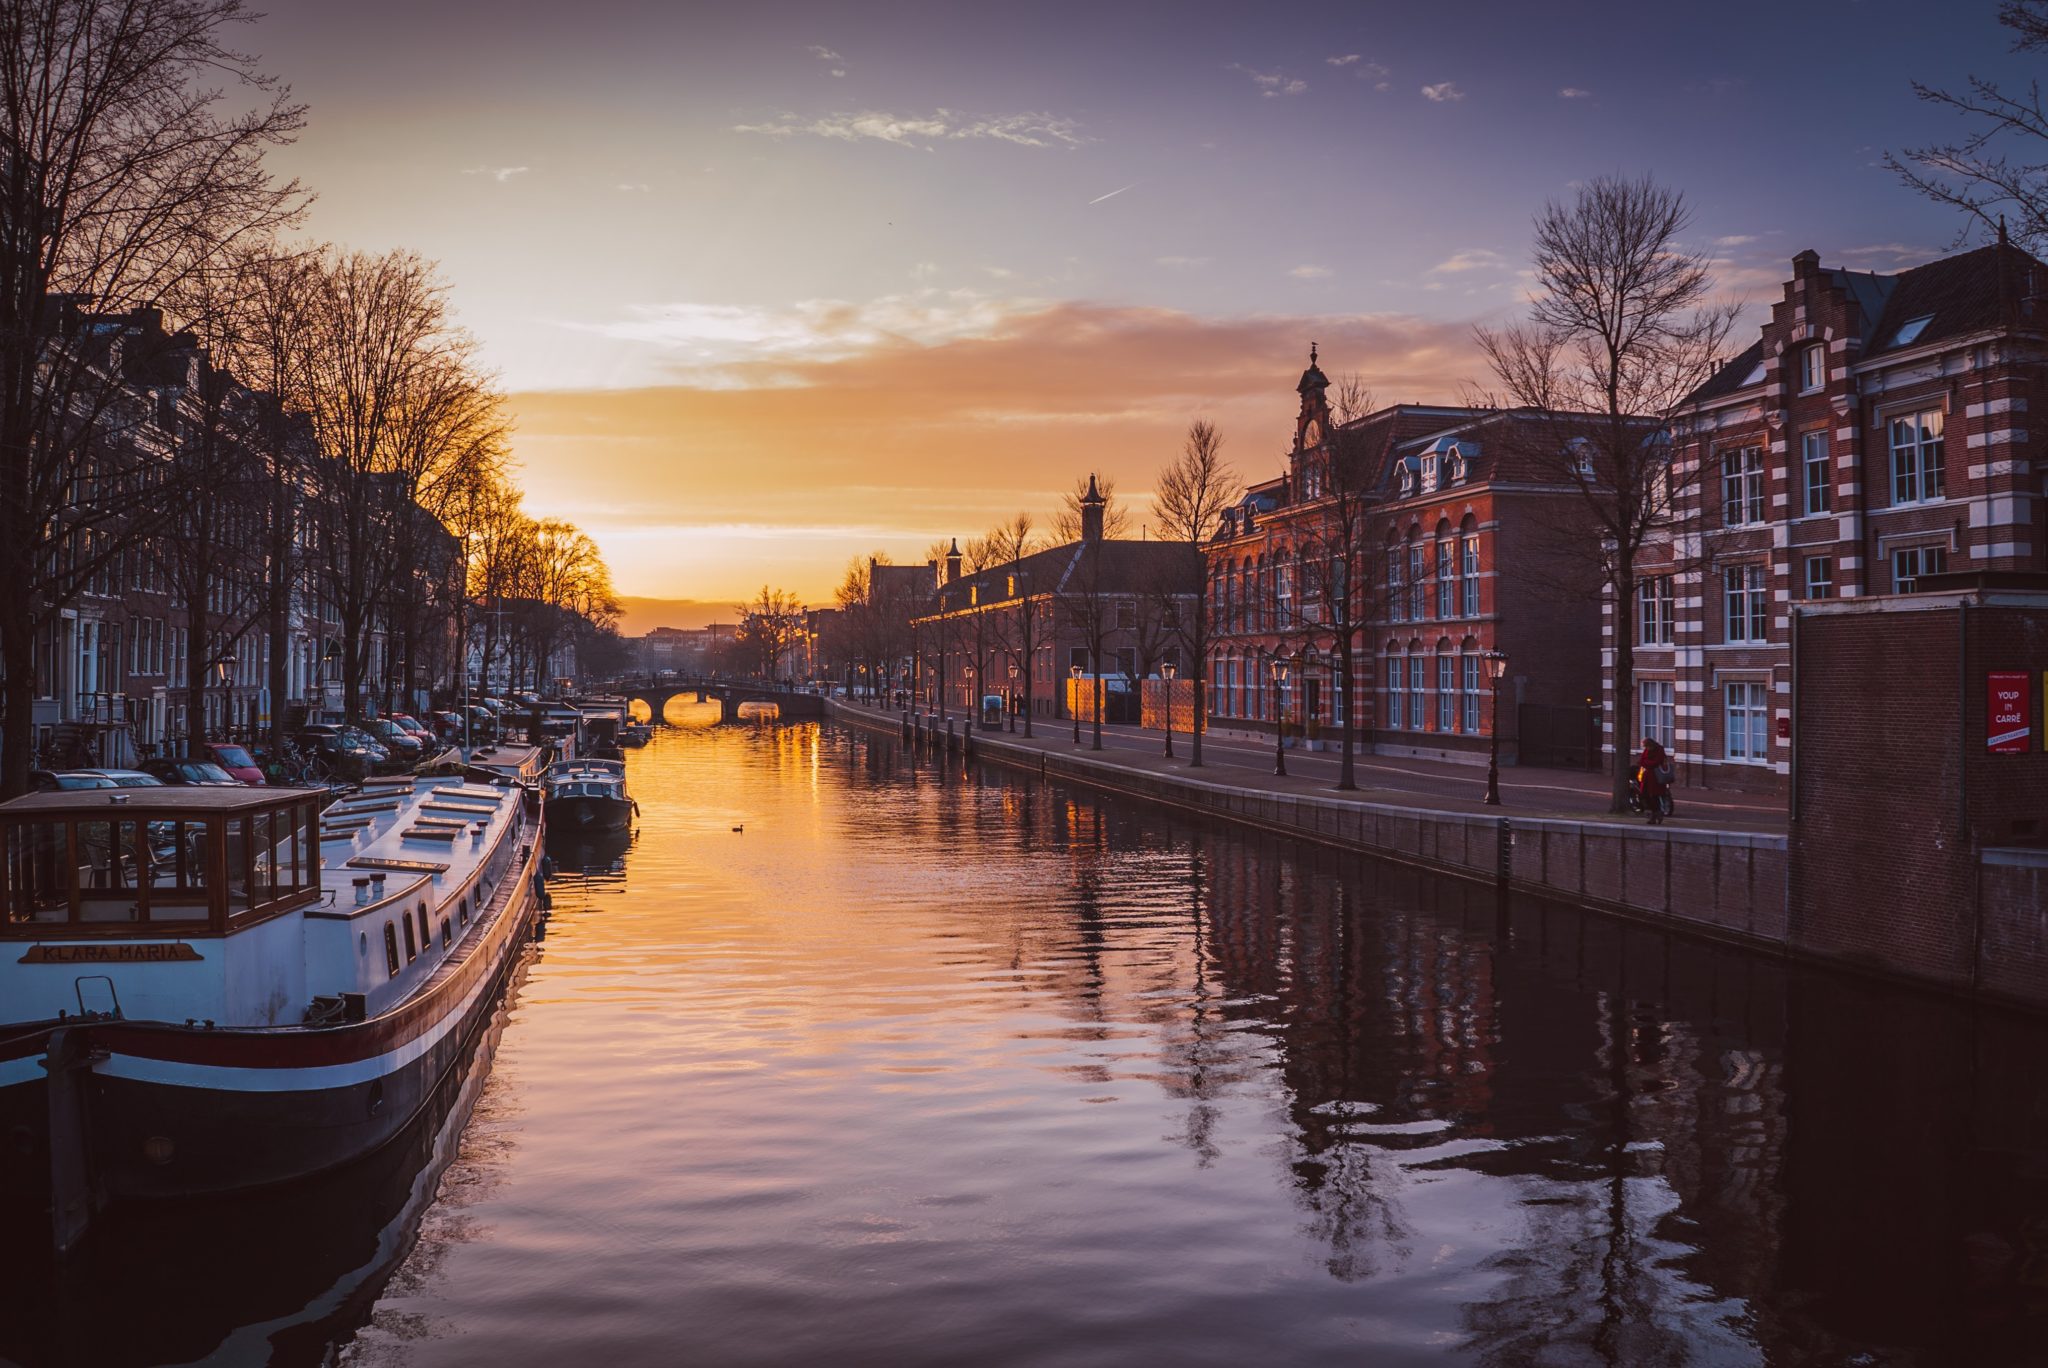 Amsterdam canal at dusk